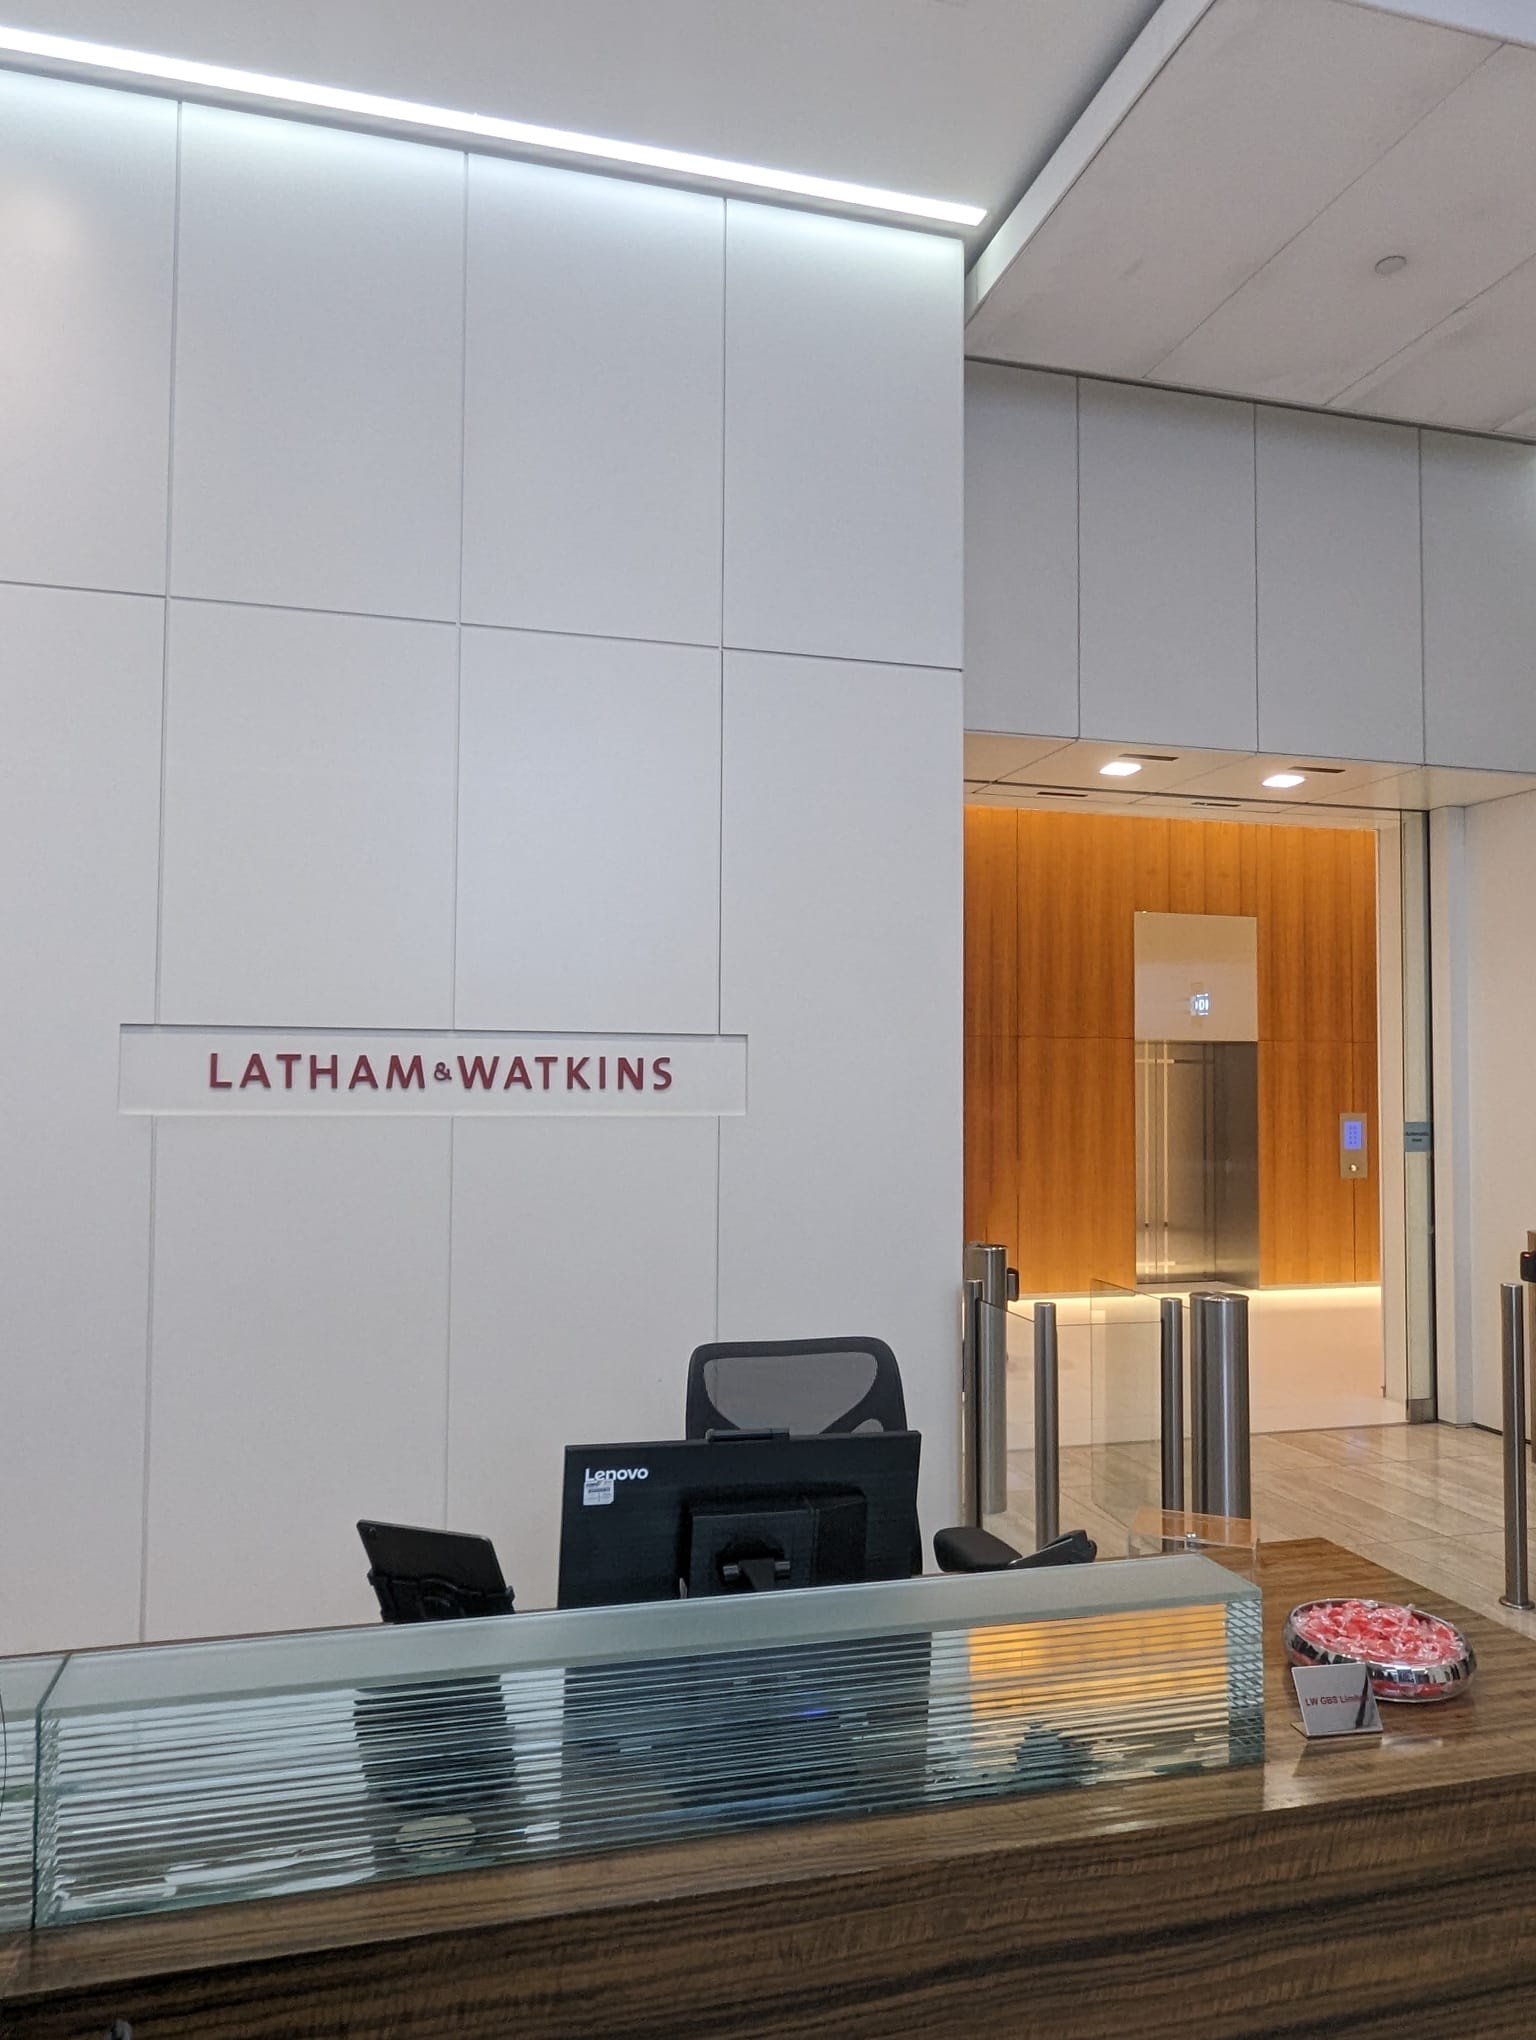 The lobby area at Latham and Watkins law firm with an empty desk, chair and a white wall with red Latham and Watkins logo